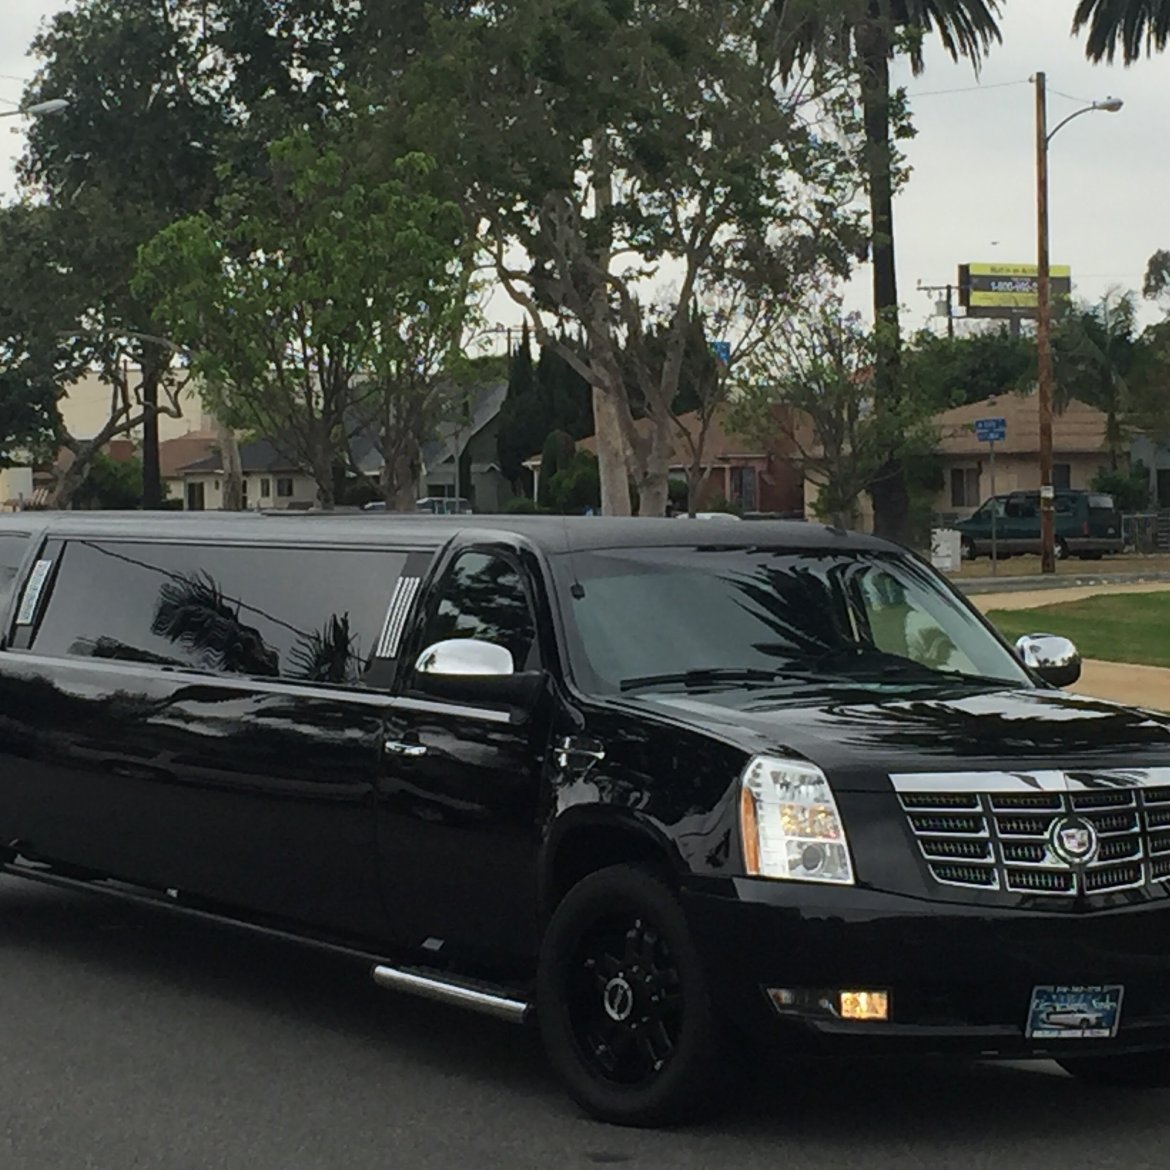 Limousine for sale: 2007 Chevrolet Escalade SUV by Executive Coach Builders